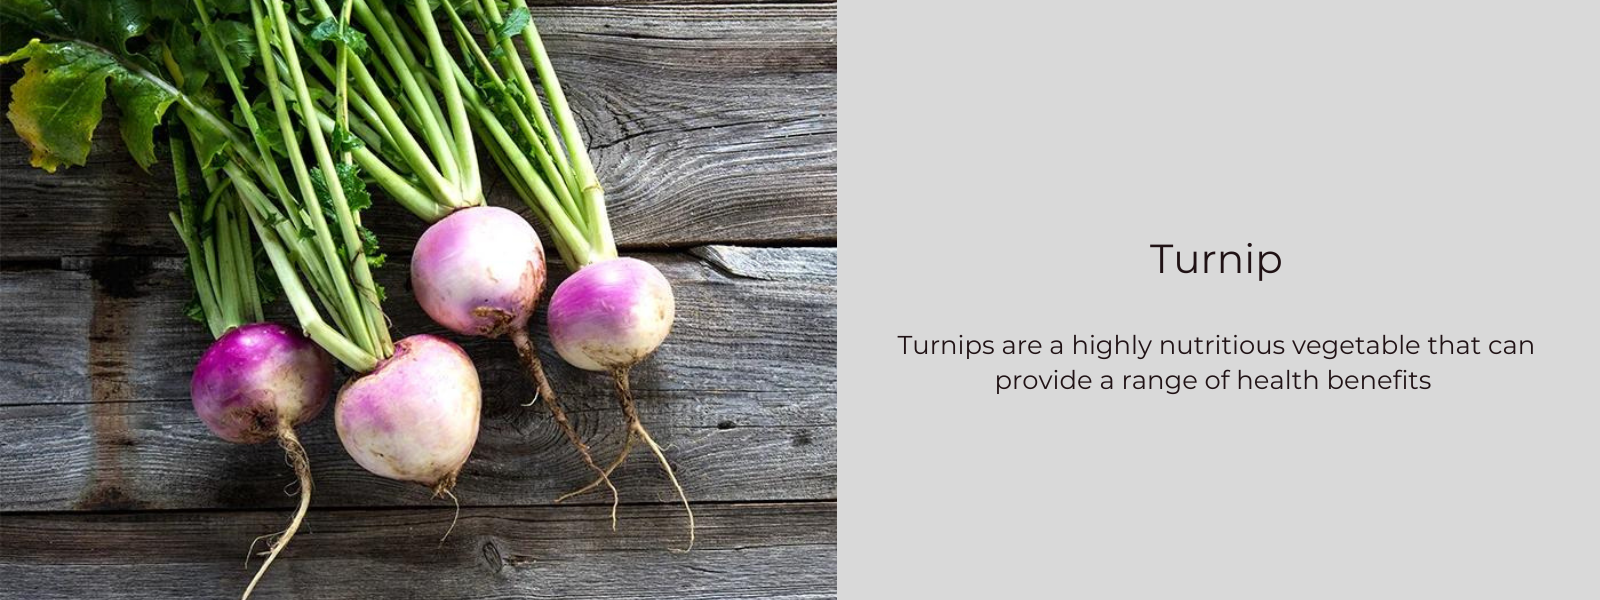 Turnip - Health Benefits, Uses and Important Facts